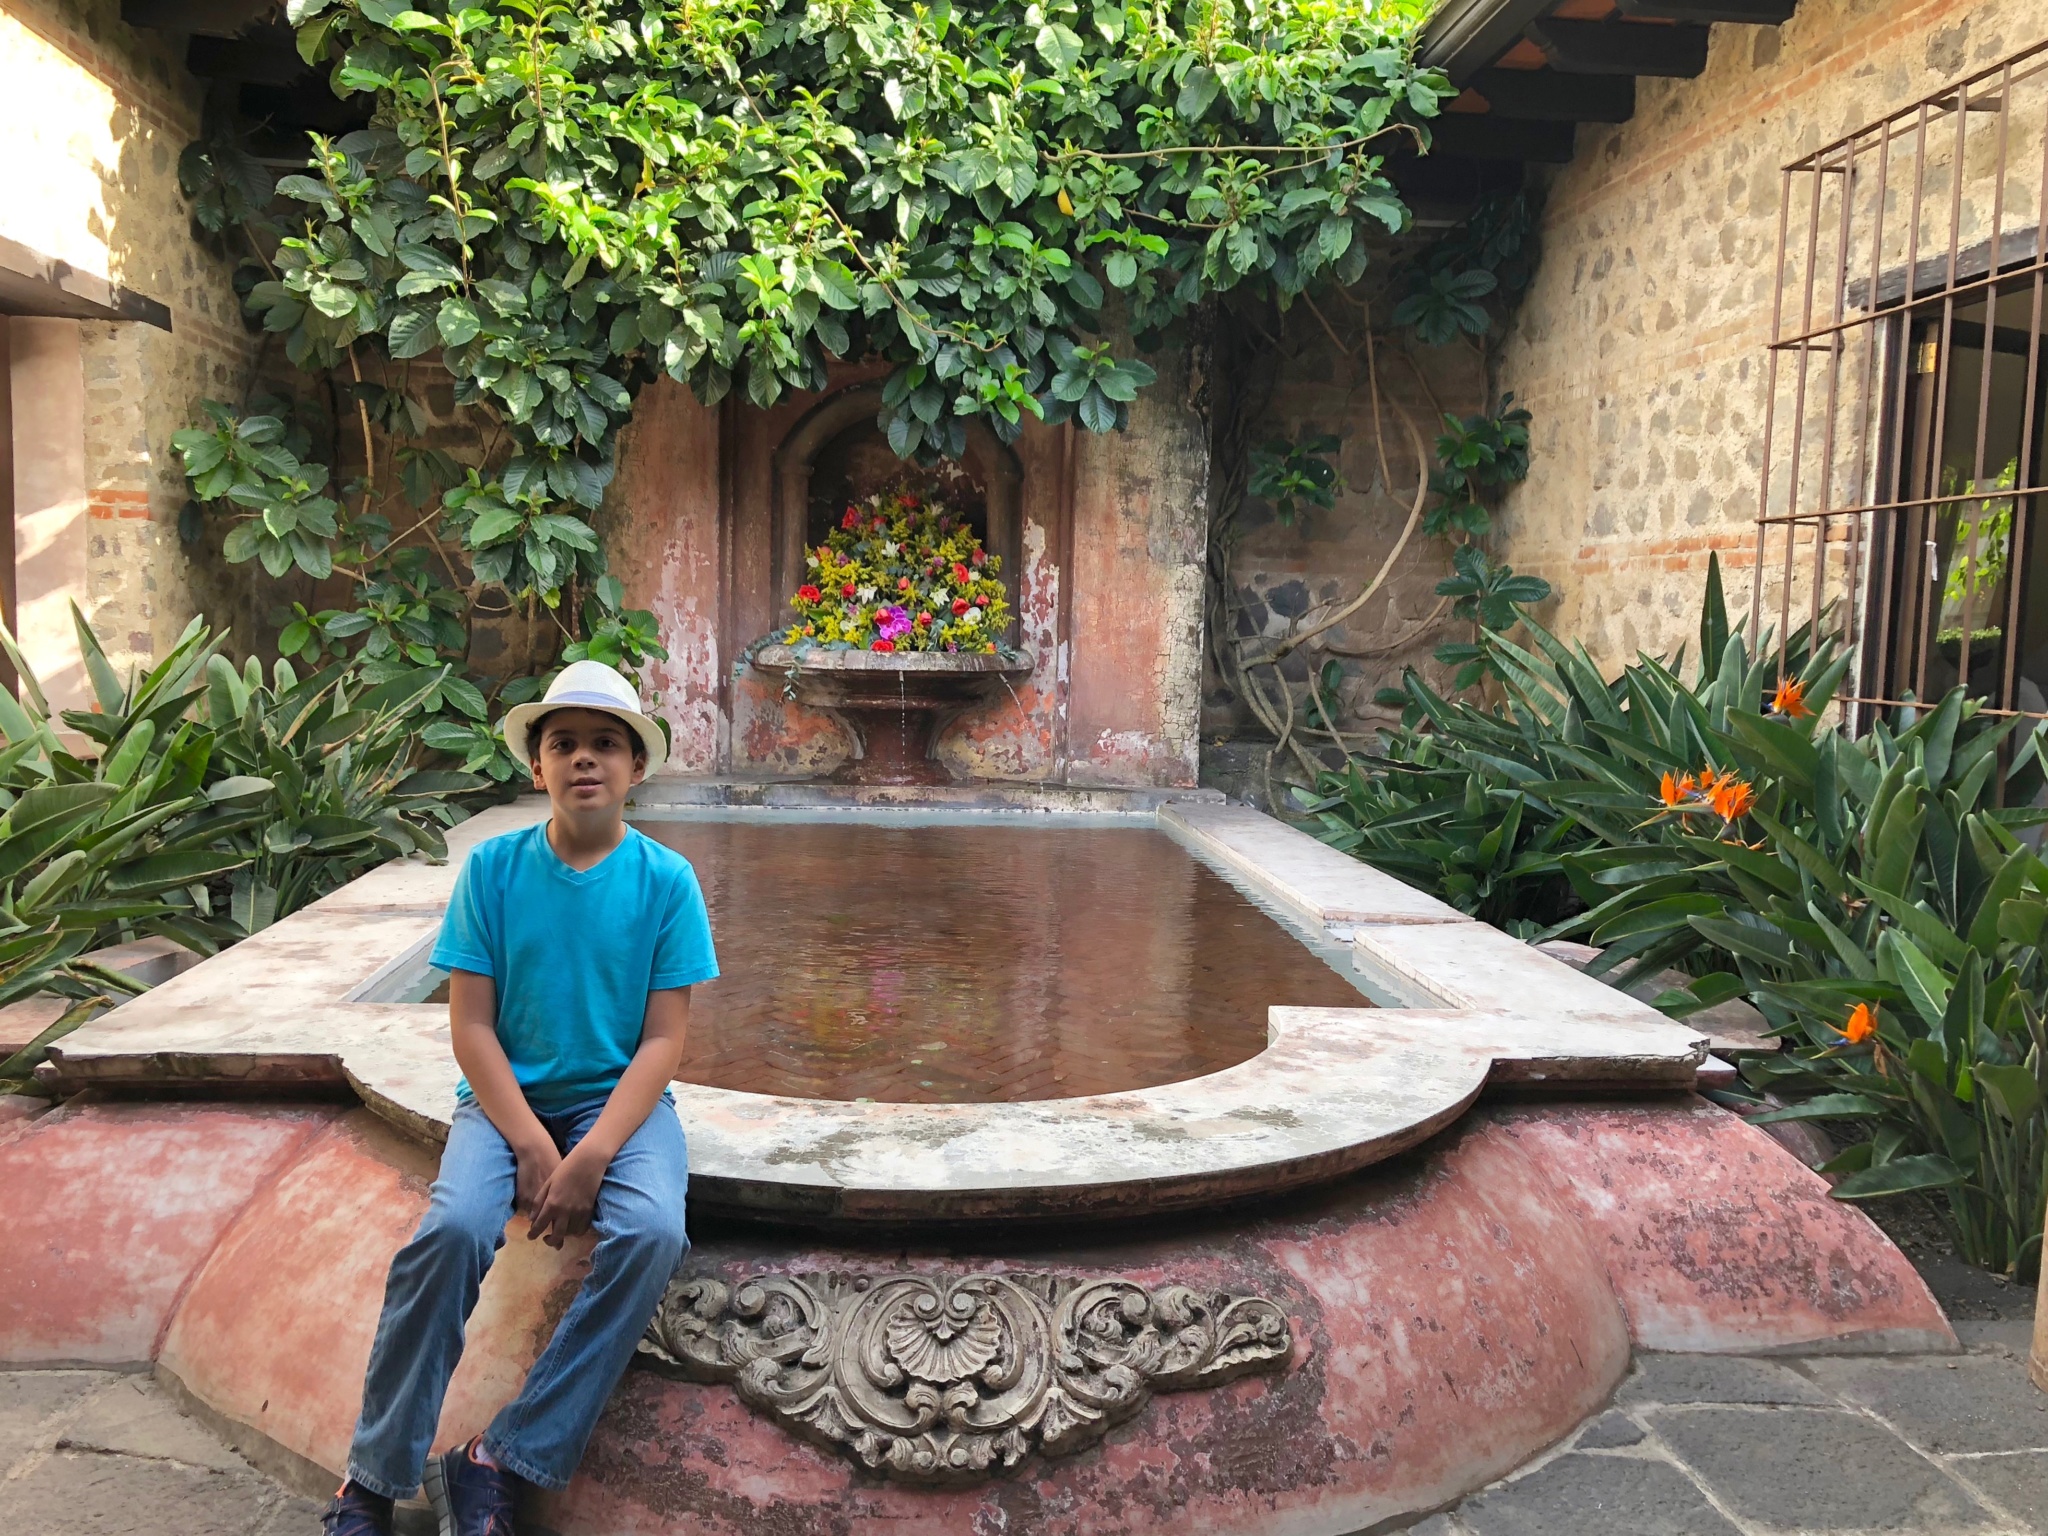 The Best Hotel For Families in Antigua Guatemala